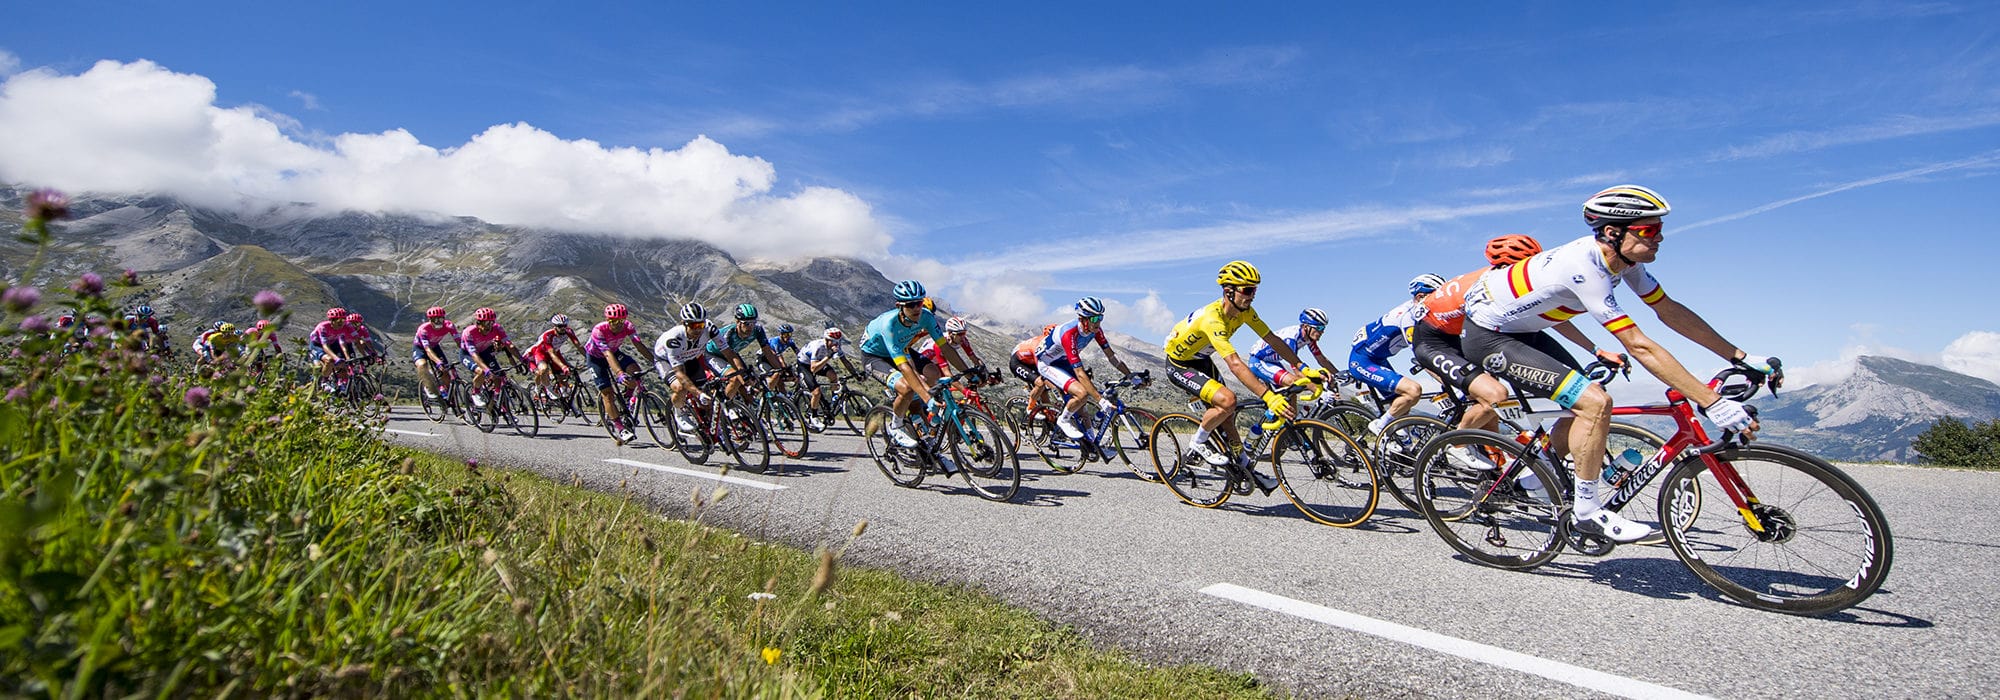 The first week of the Tour de France and the roads of southern France: From the Alps to the Pyrénées-Atlantiques.